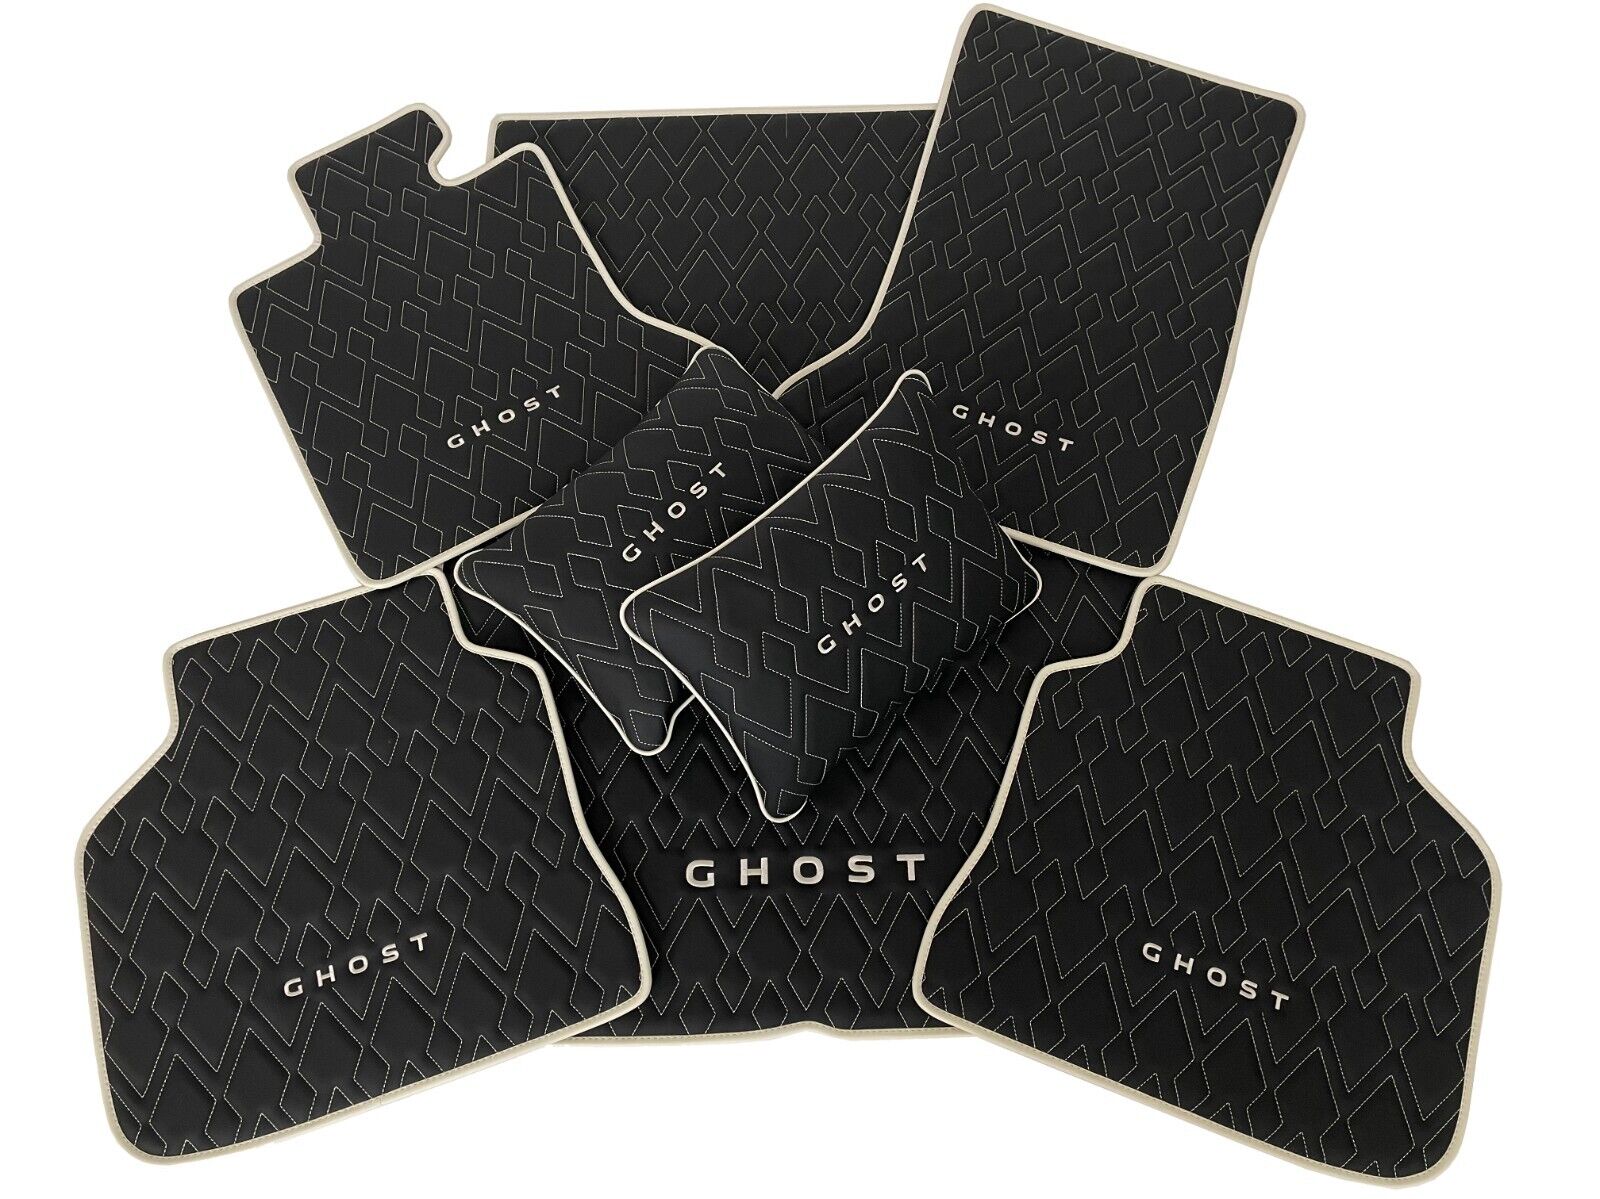 Rolls Royce Ghost Eco Leather Floor Mats, Trunk, Pillows in various colors